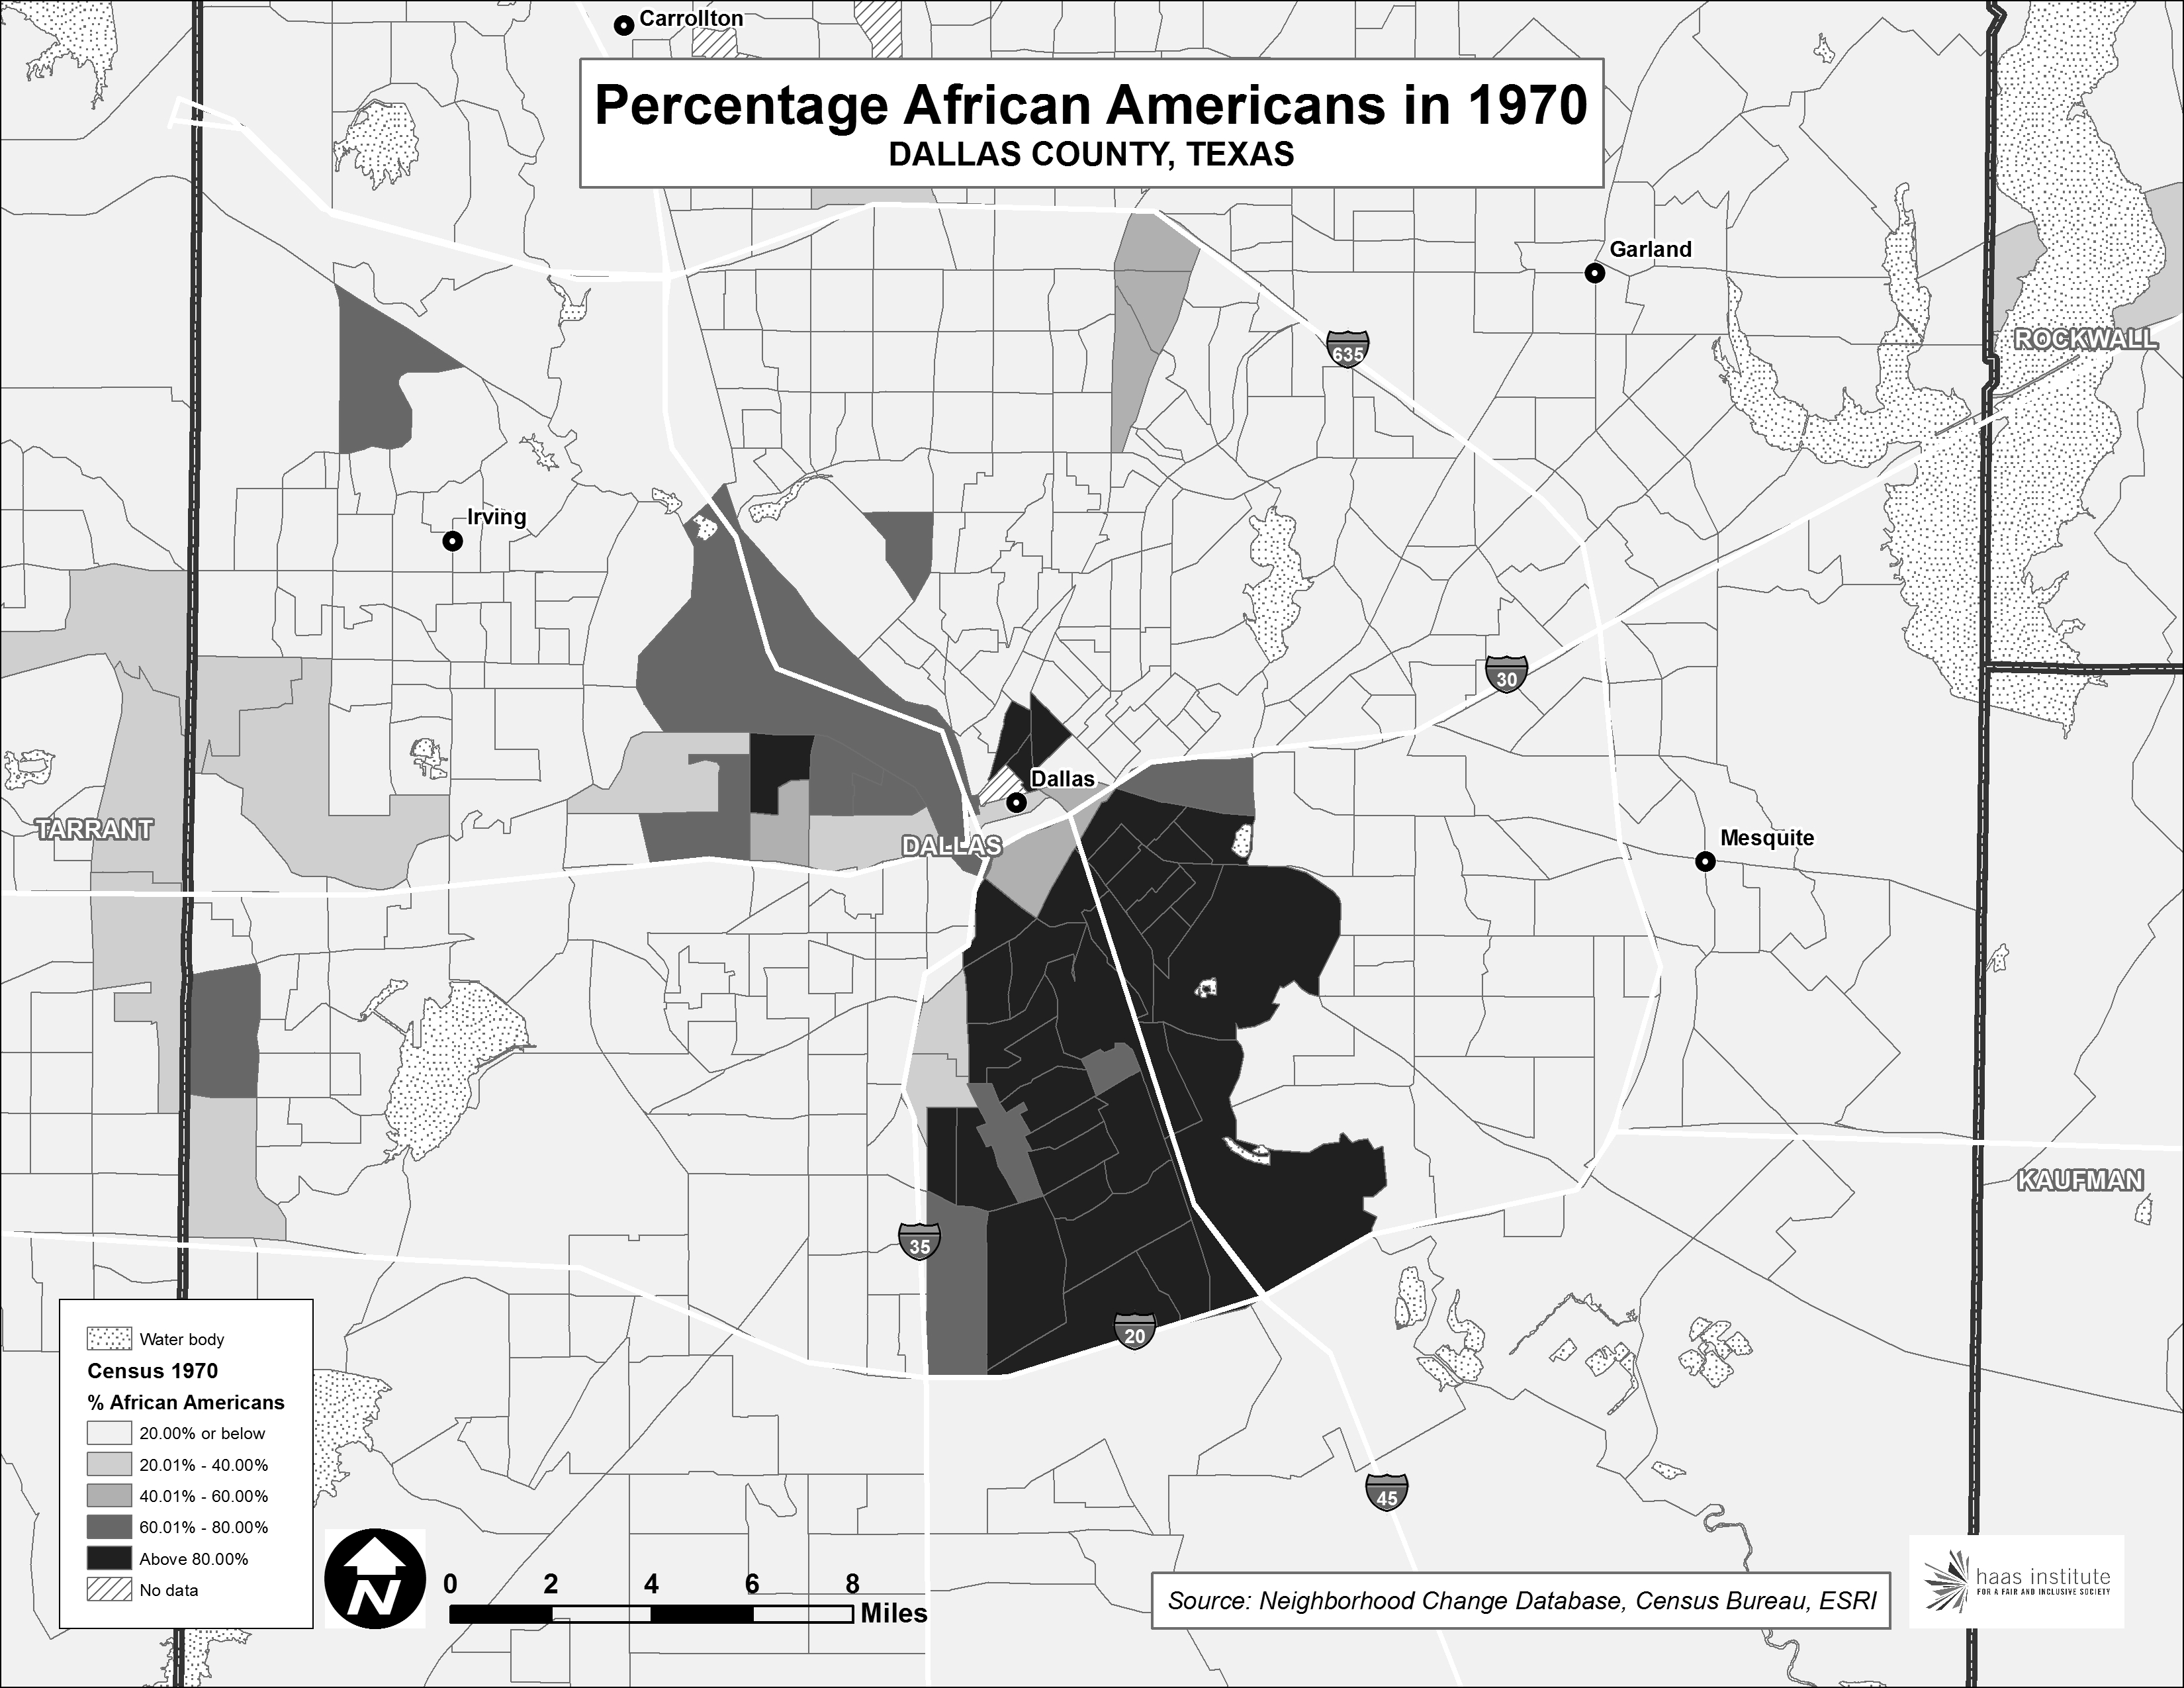 The percentage of African Americans, by census tract, in Dallas County, in 1970. 